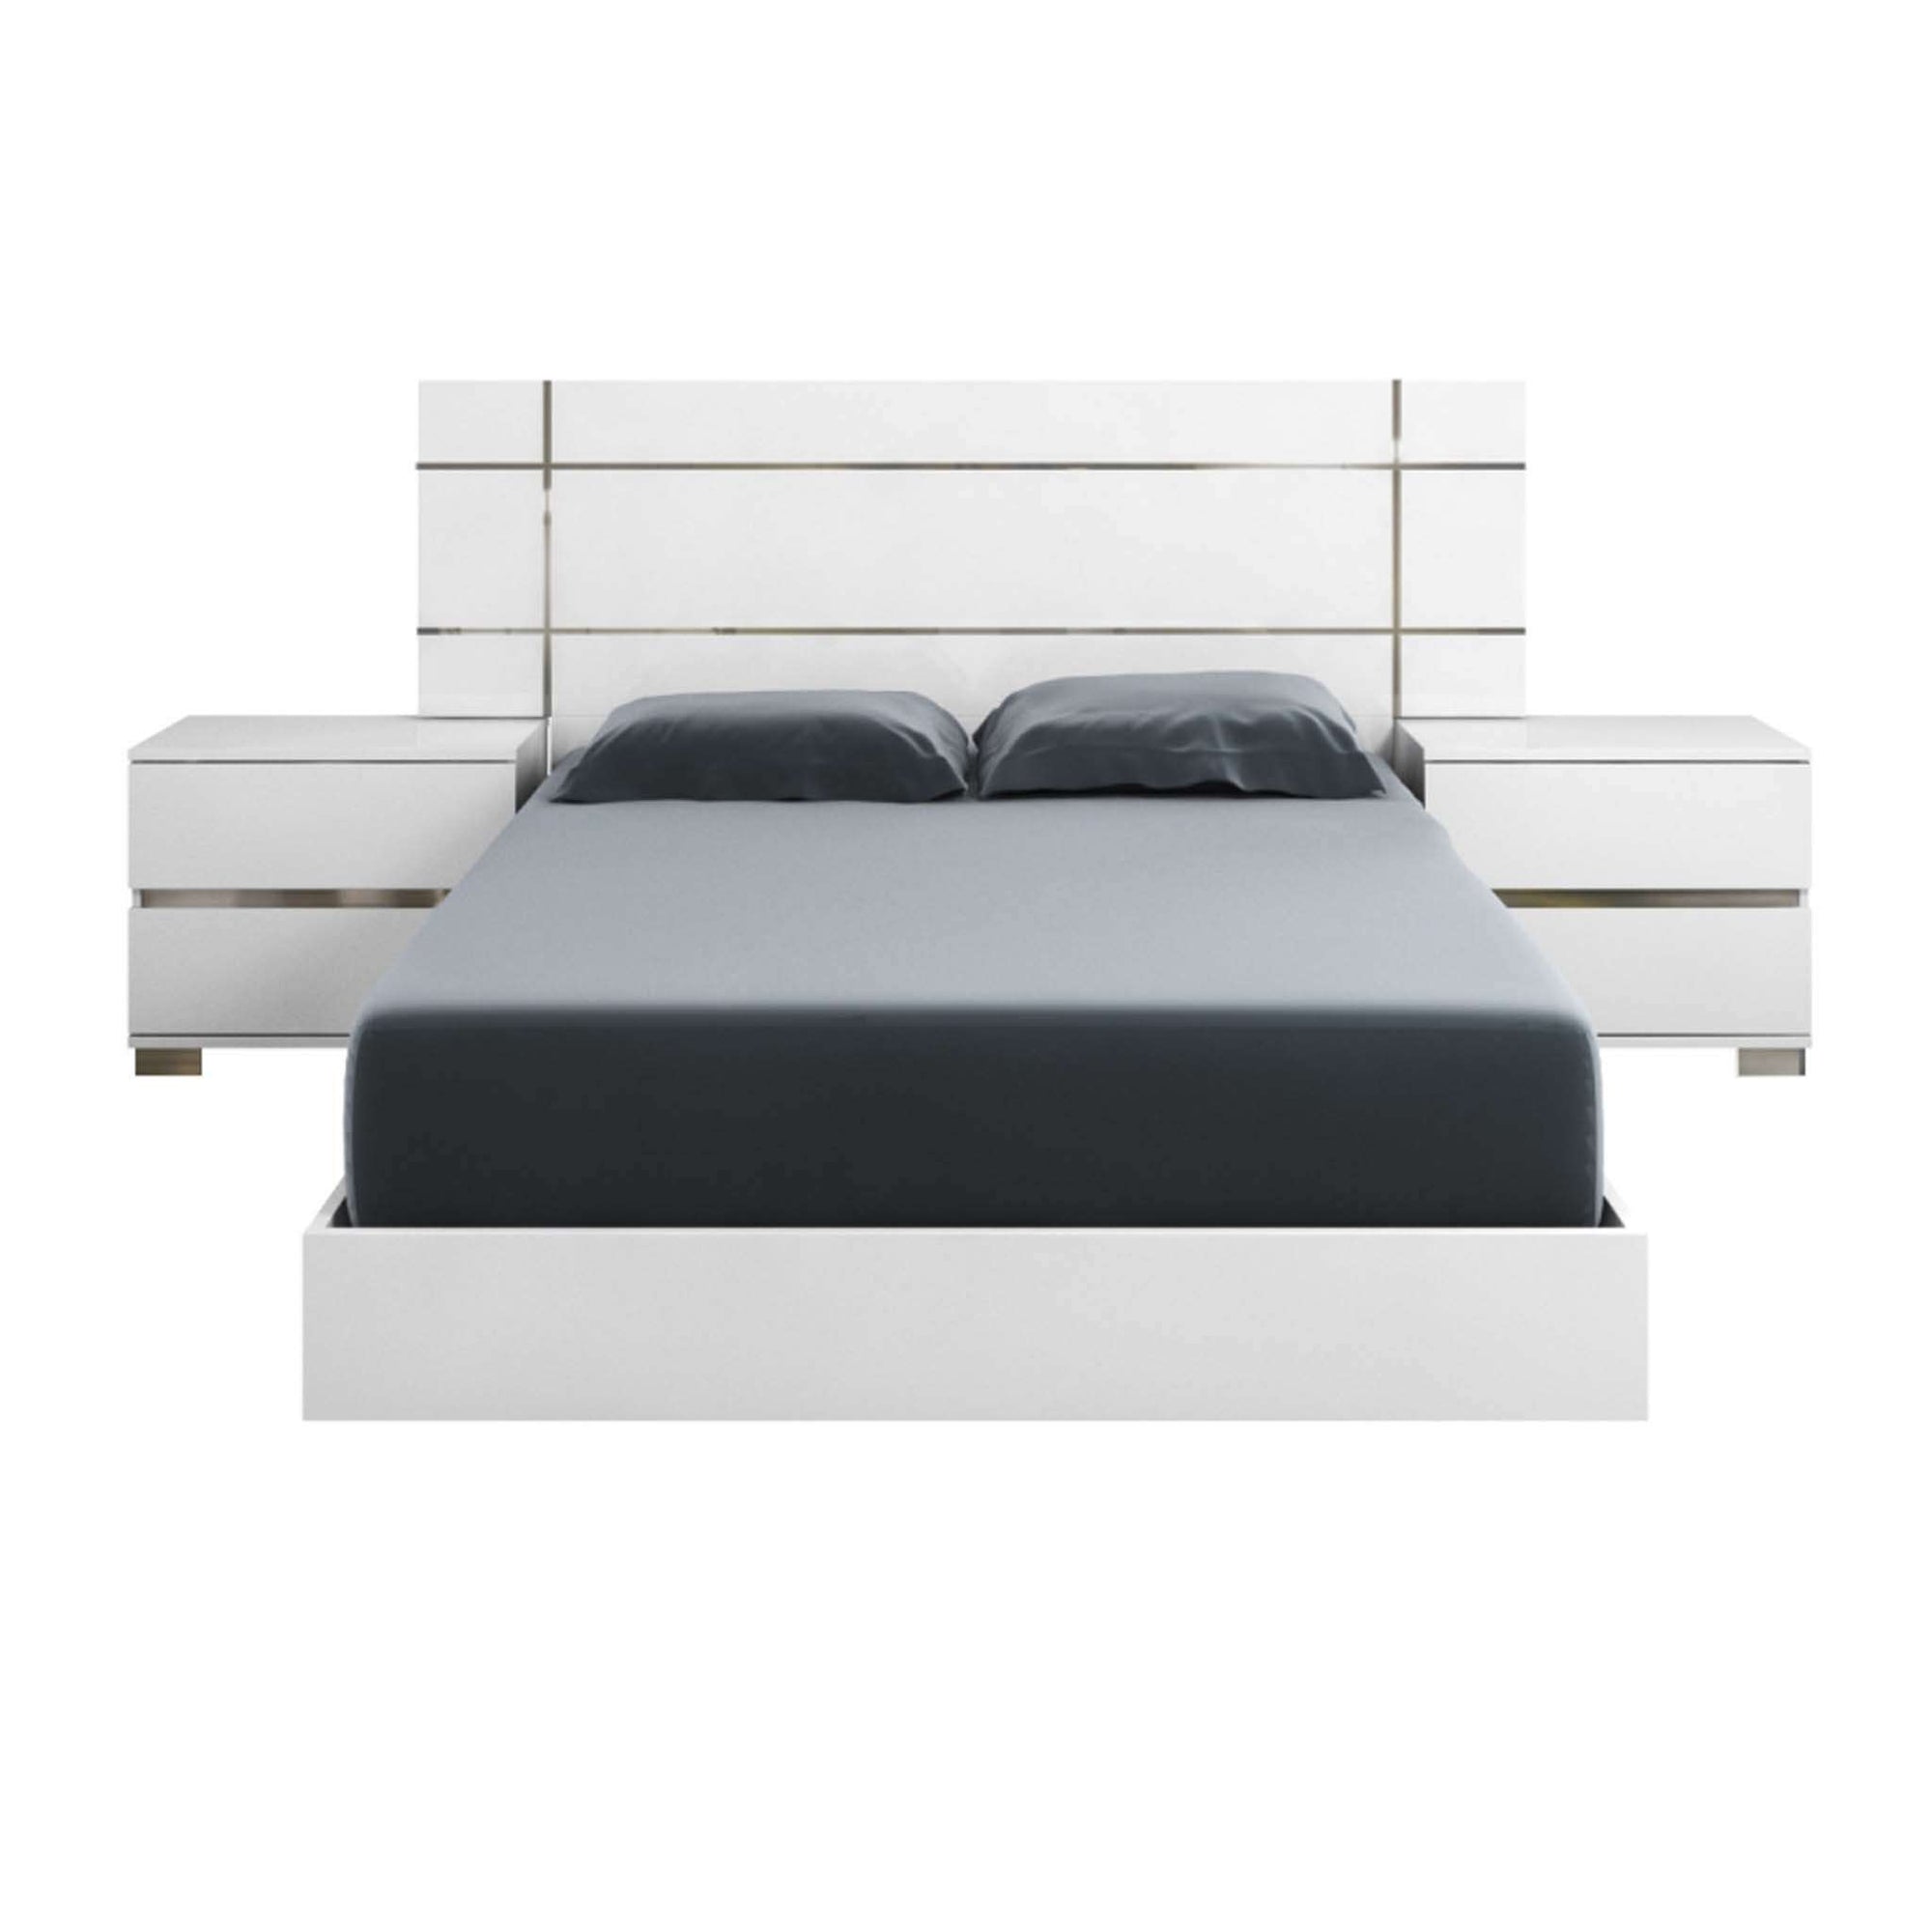 Star International Furniture-Icon Cal King Bed-Bed-MODTEMPO